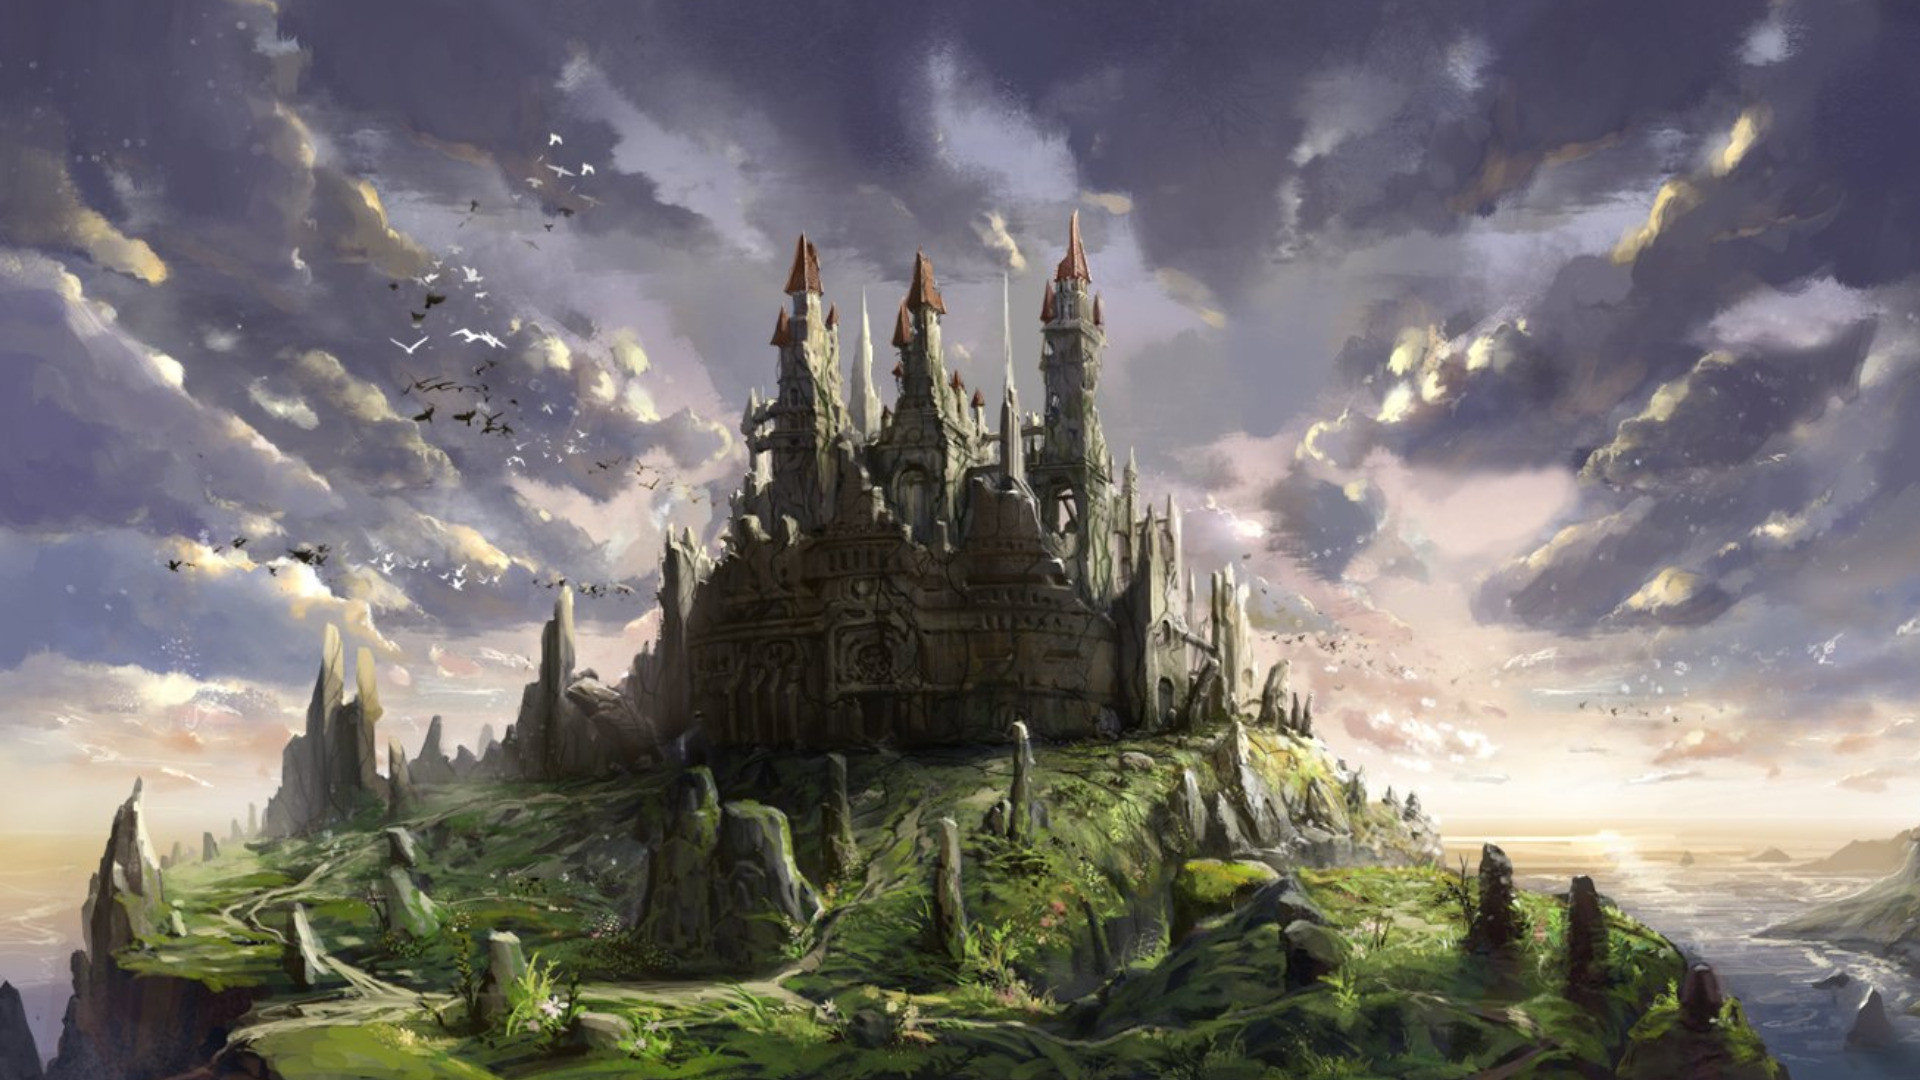 1920x1080 Fantasy Castle Wallpaper Free With Wallpapers Wide Resolution  px  418.51 KB